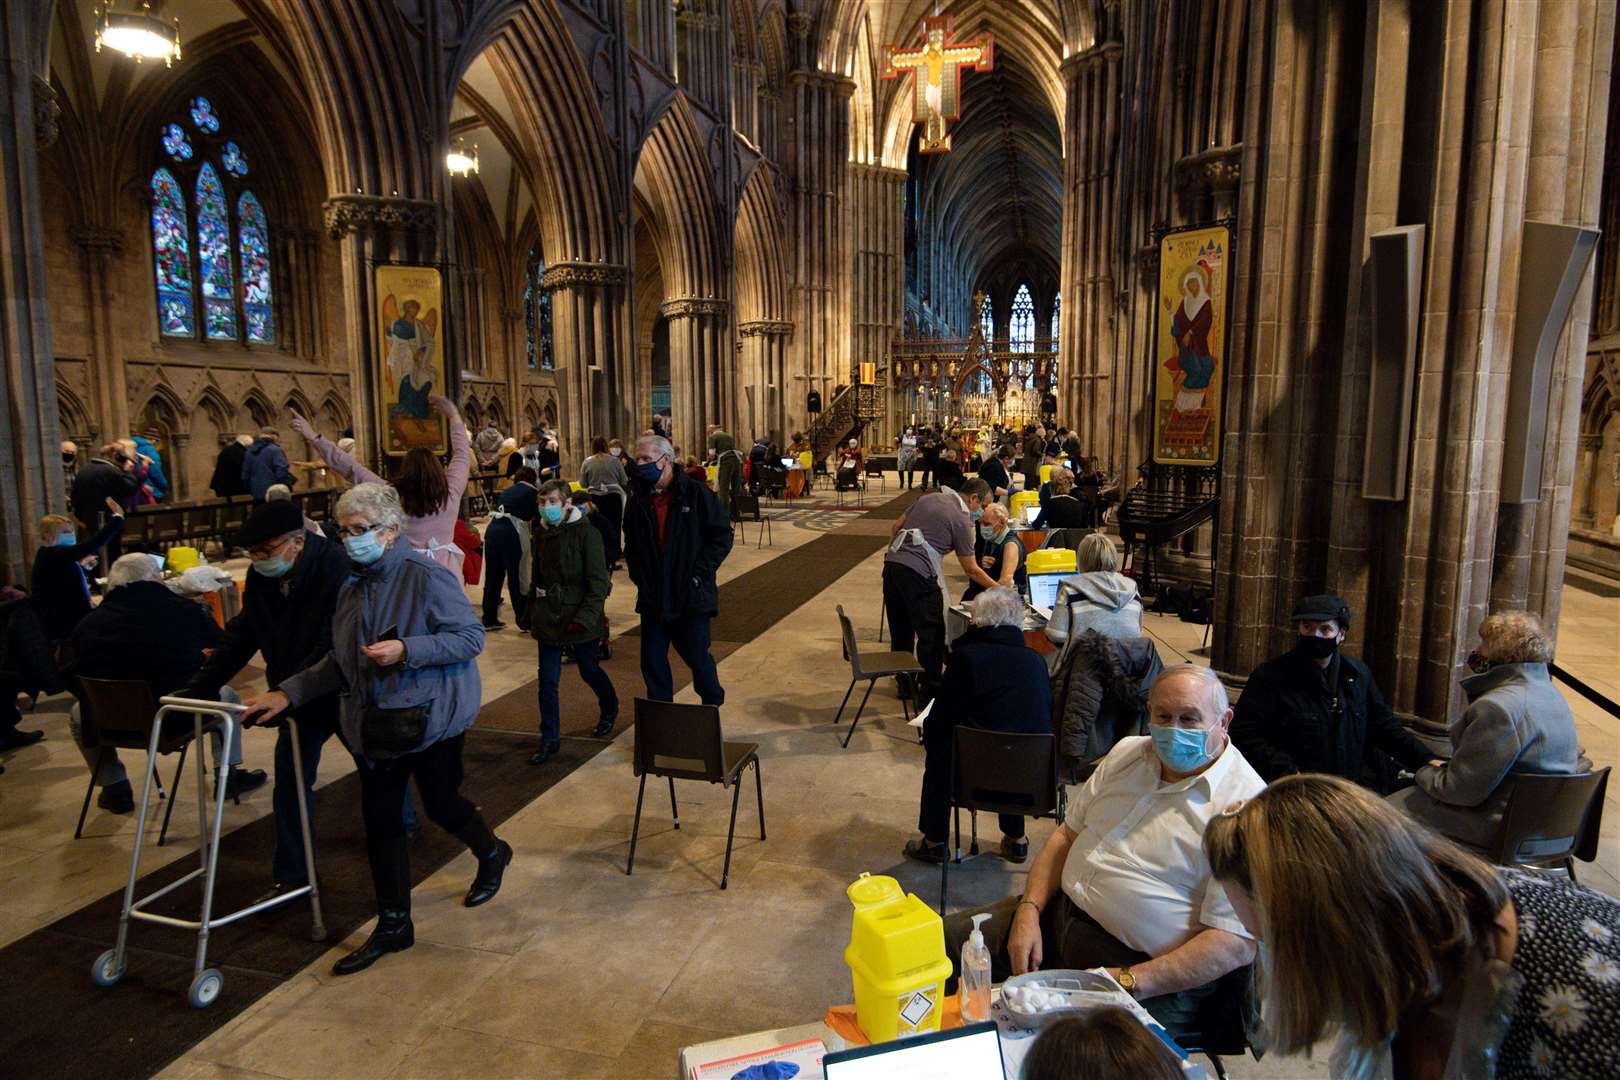 Members of the public receive vaccines at Lichfield Cathedral (Jacob King/PA)